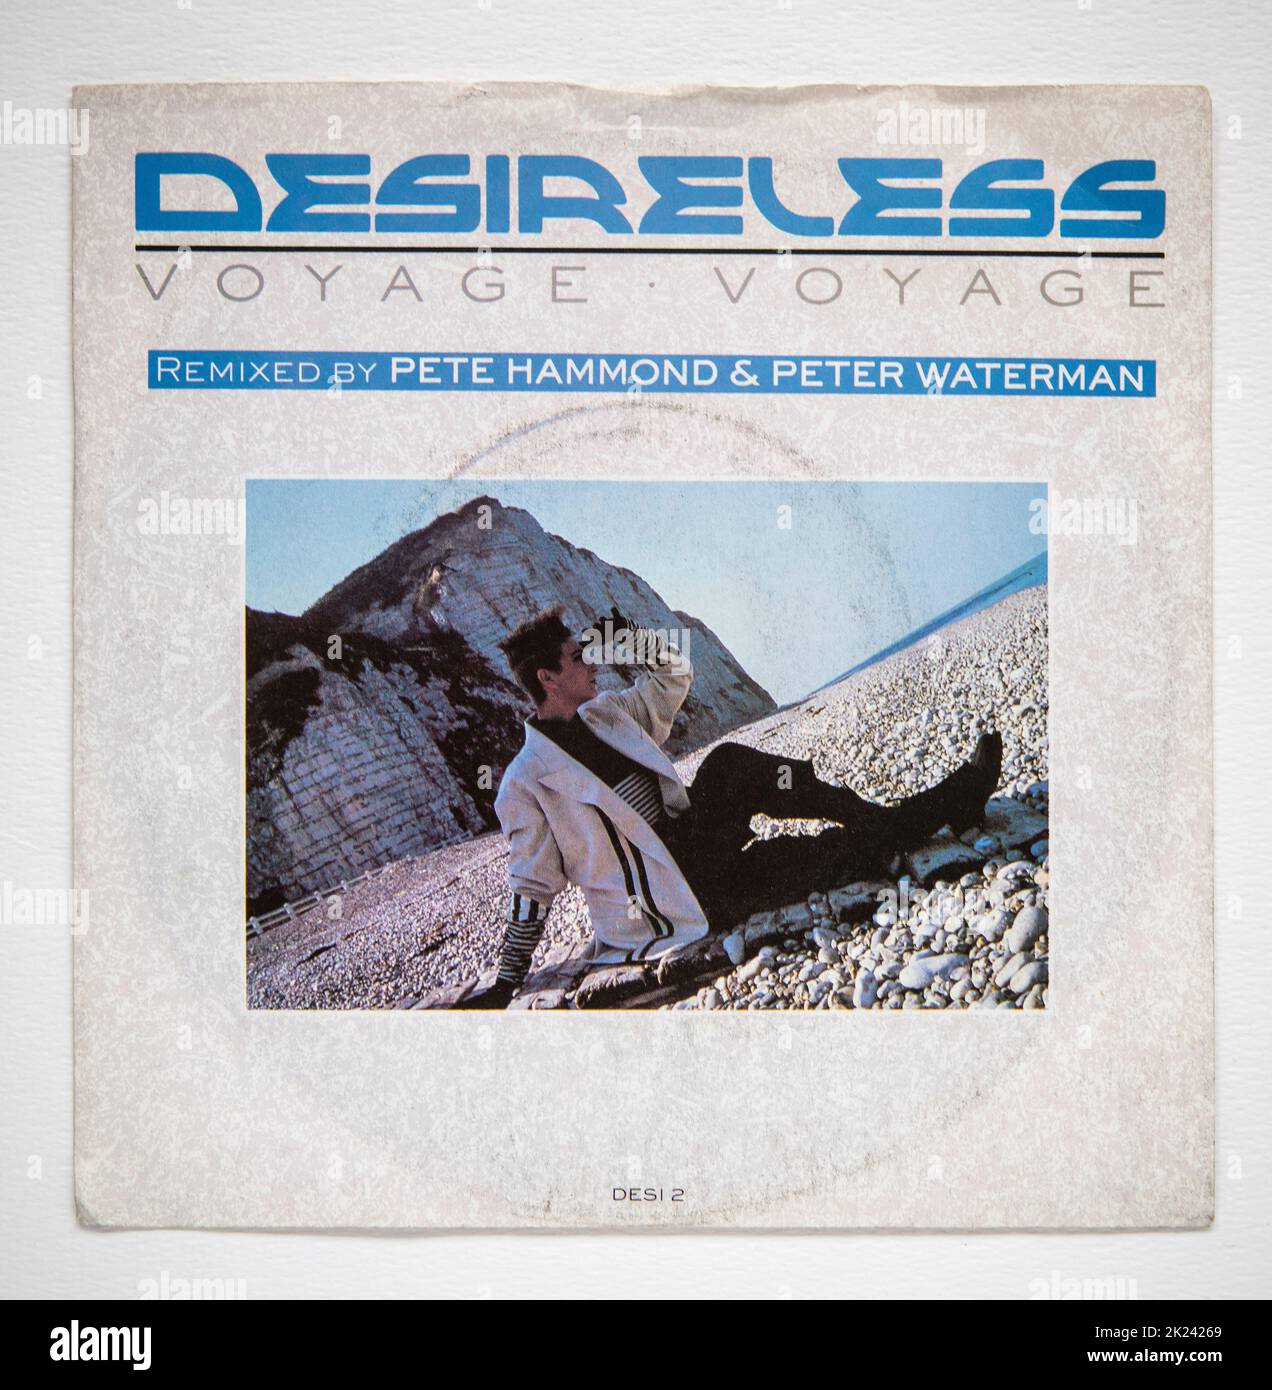 Picture cover of the seven inch single version of Voyage Voyage by Desireless, which was released in 1986. Stock Photo